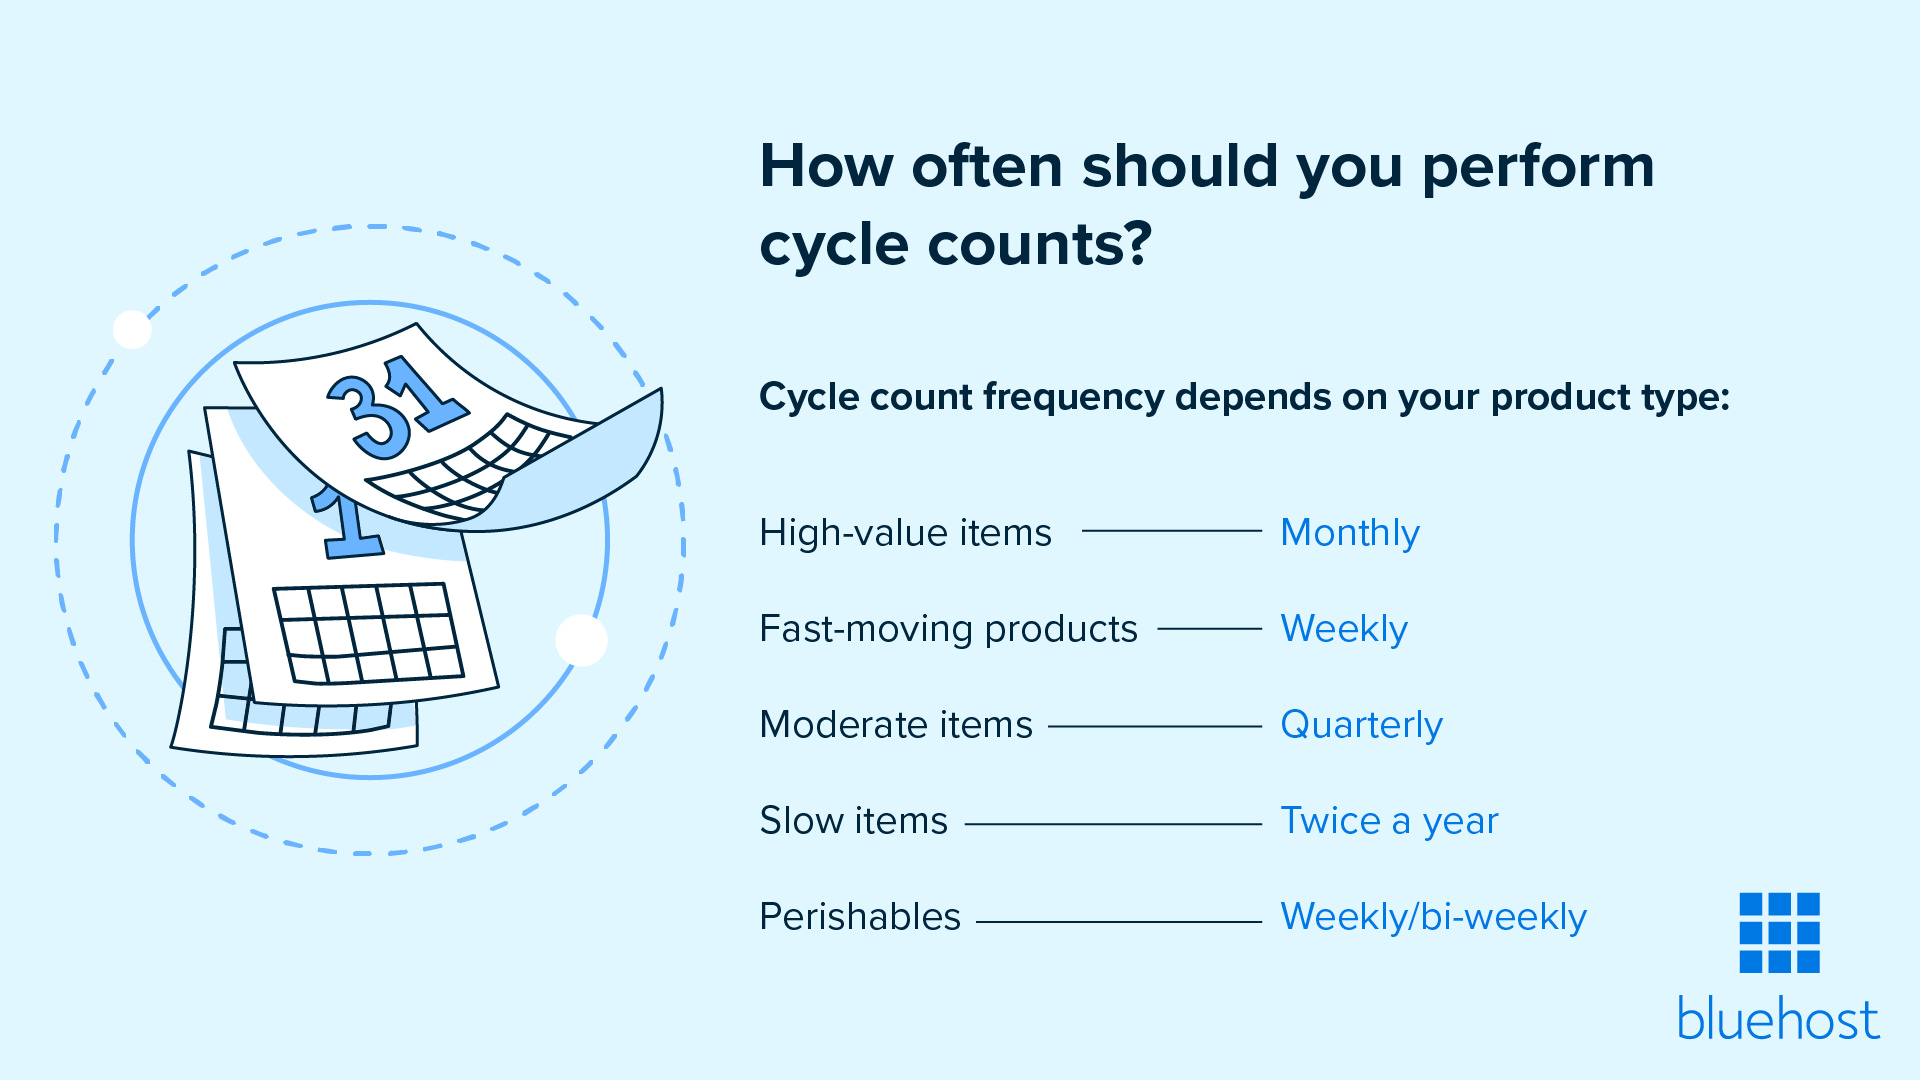 How often should you perform cycle counts?